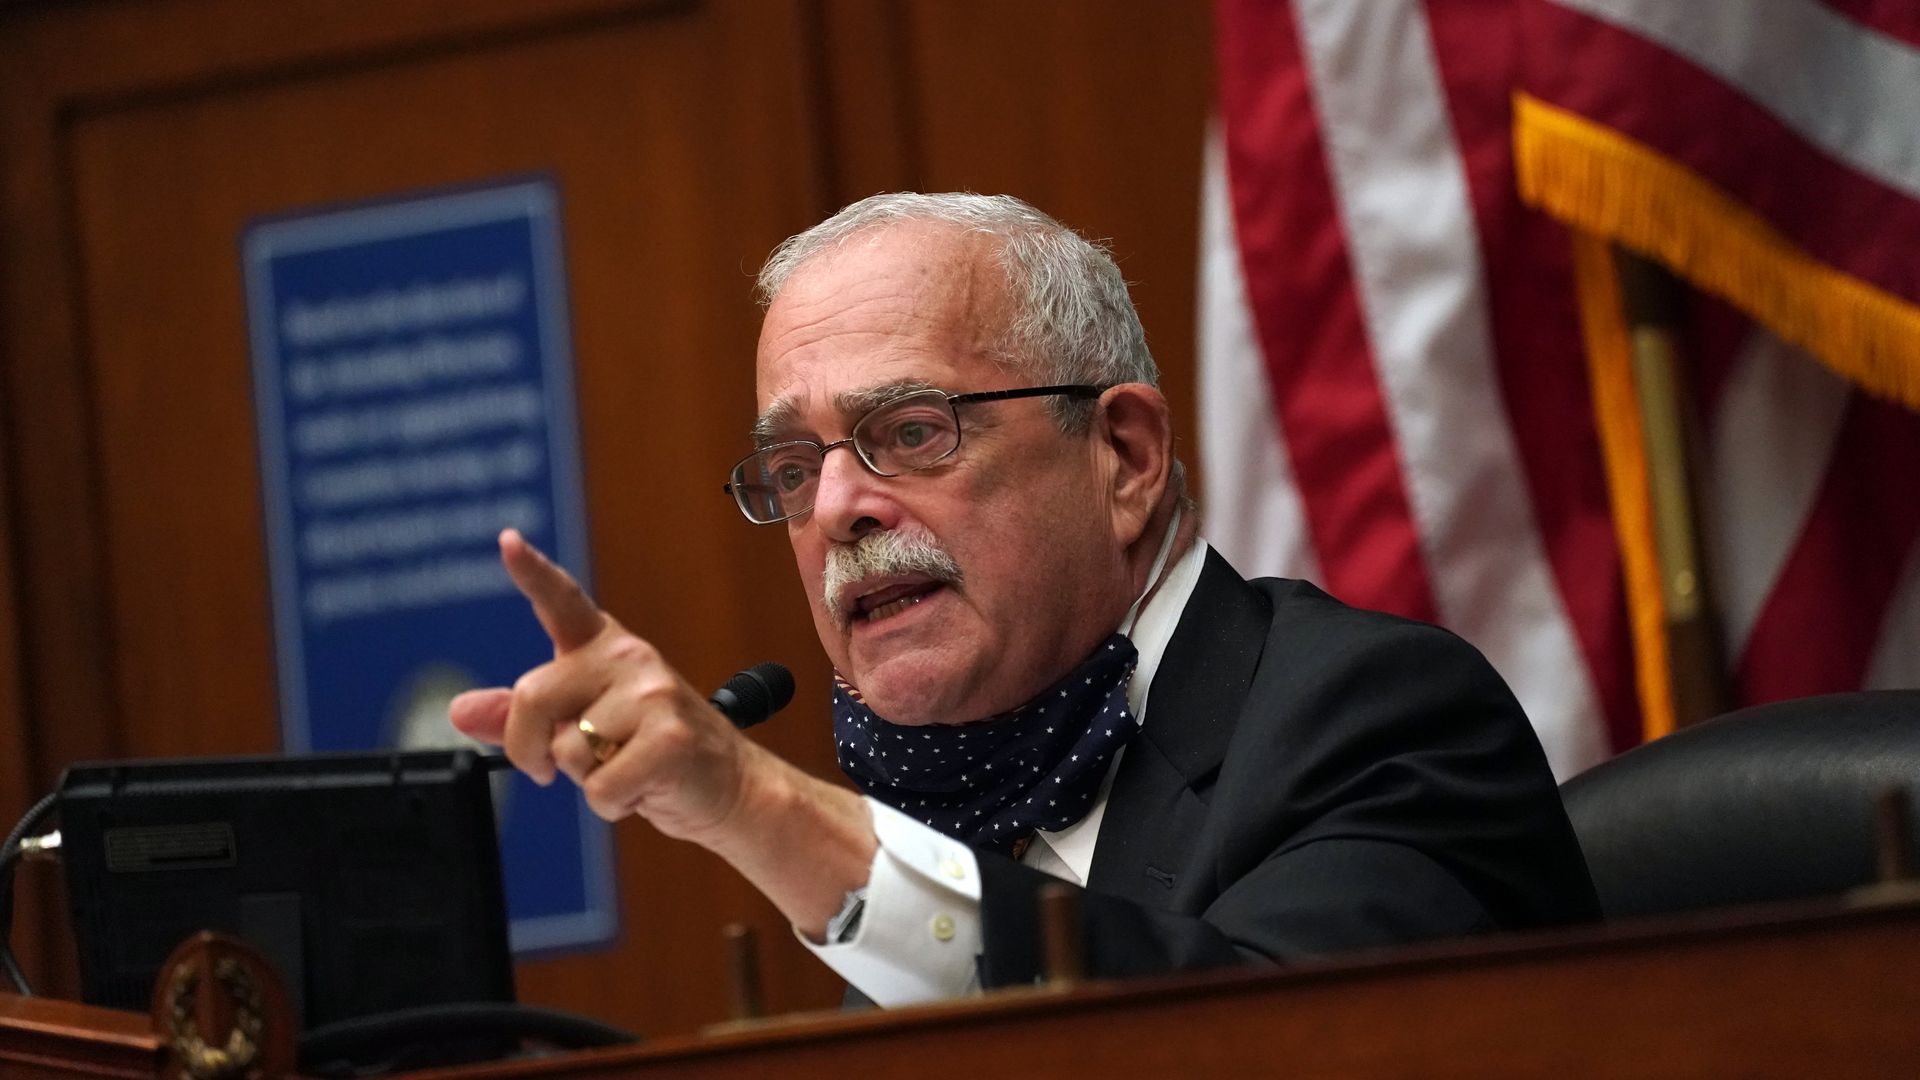 Rep. Gerry Connolly (D-VA) speaks during a House Committee on Oversight and Reform hearing on October 07, 2020.